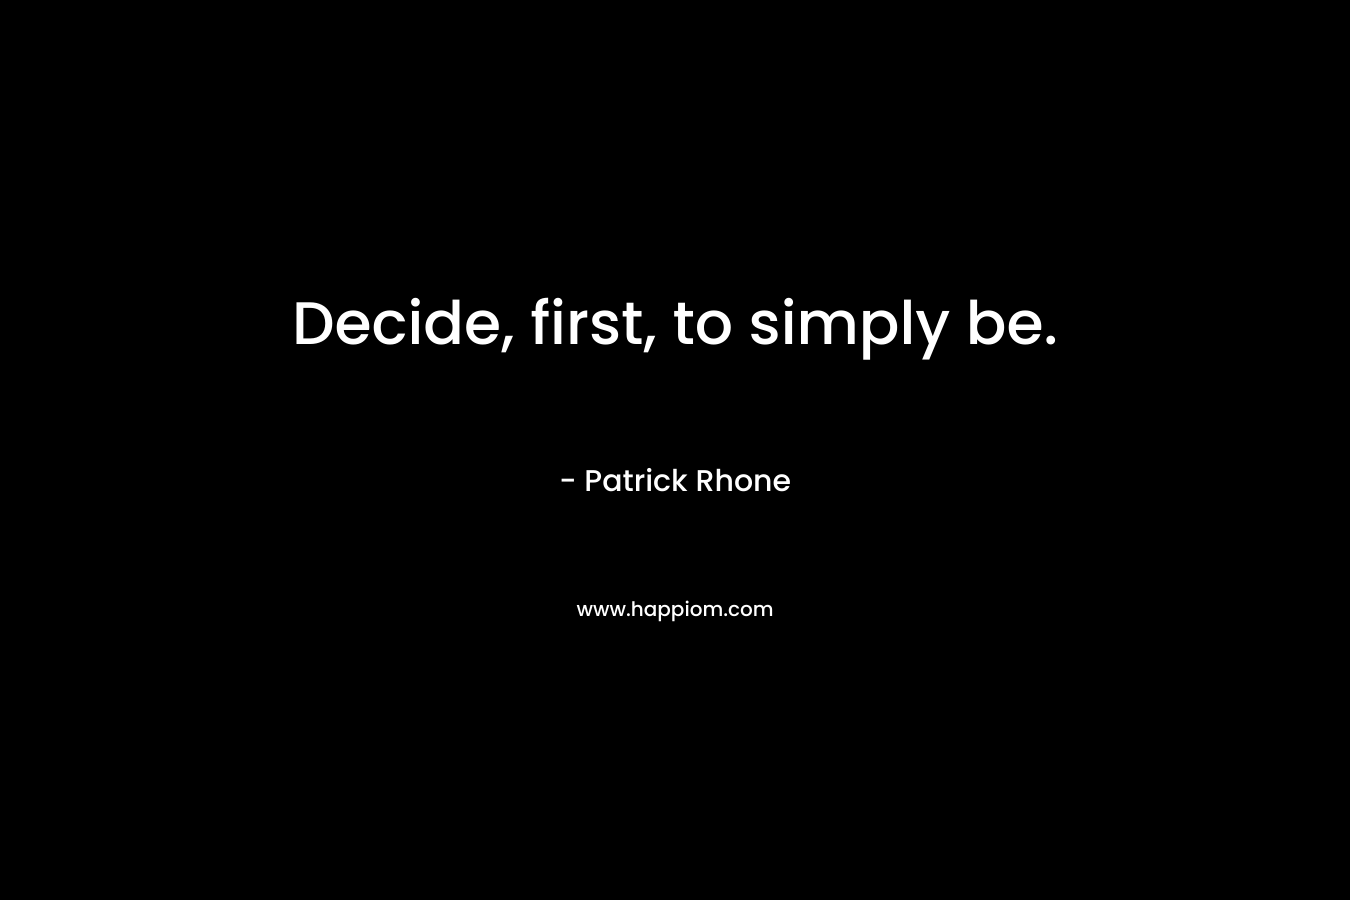 Decide, first, to simply be. – Patrick Rhone